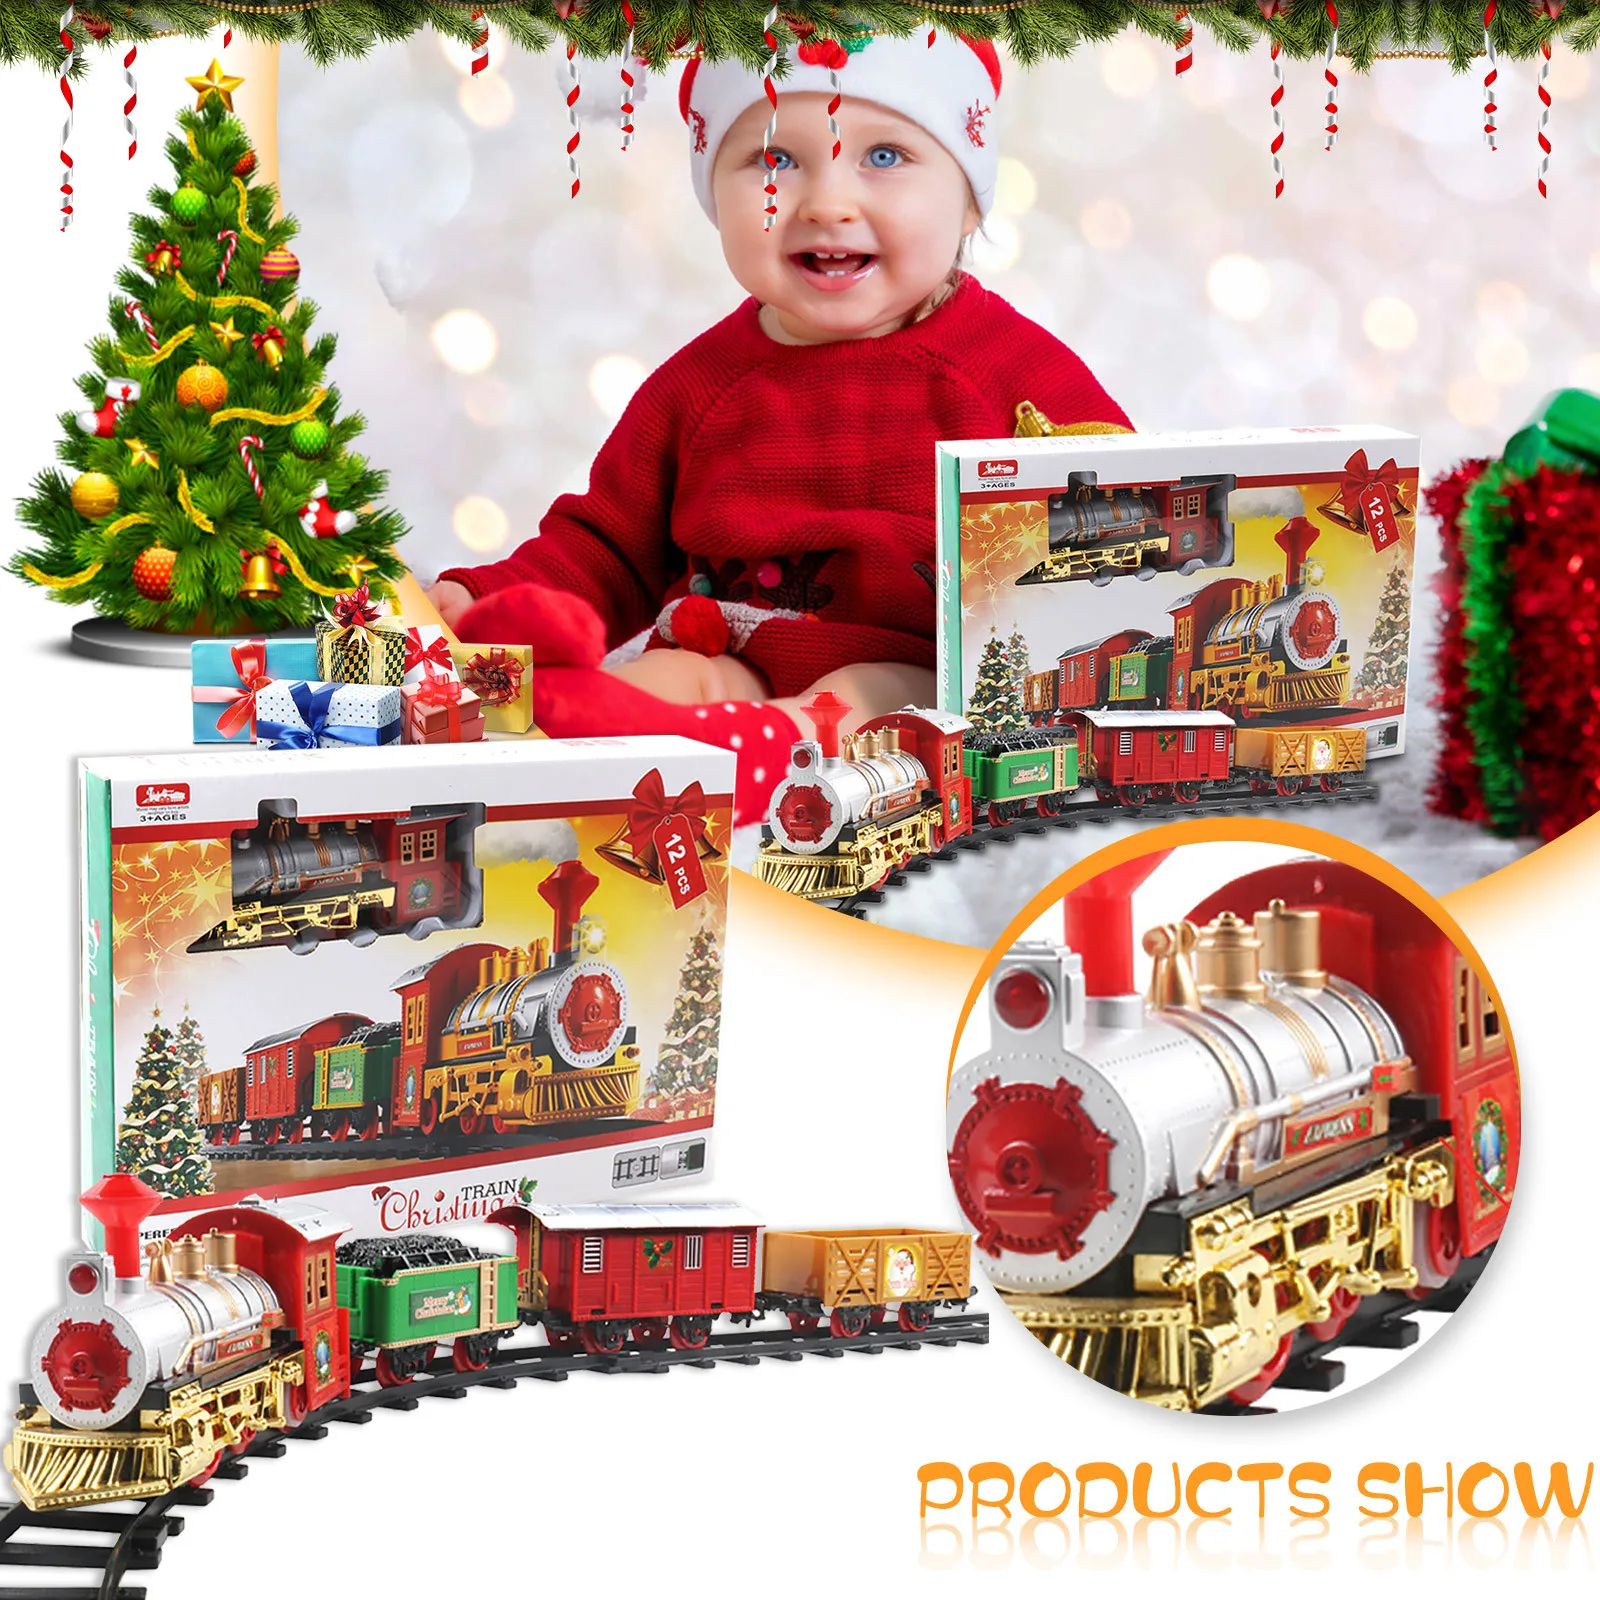 

Christmas Electric Train Toys Railway Toy Cars Racing Track With Music Santa Claus Christmas Tree Decoration Train Model Toys